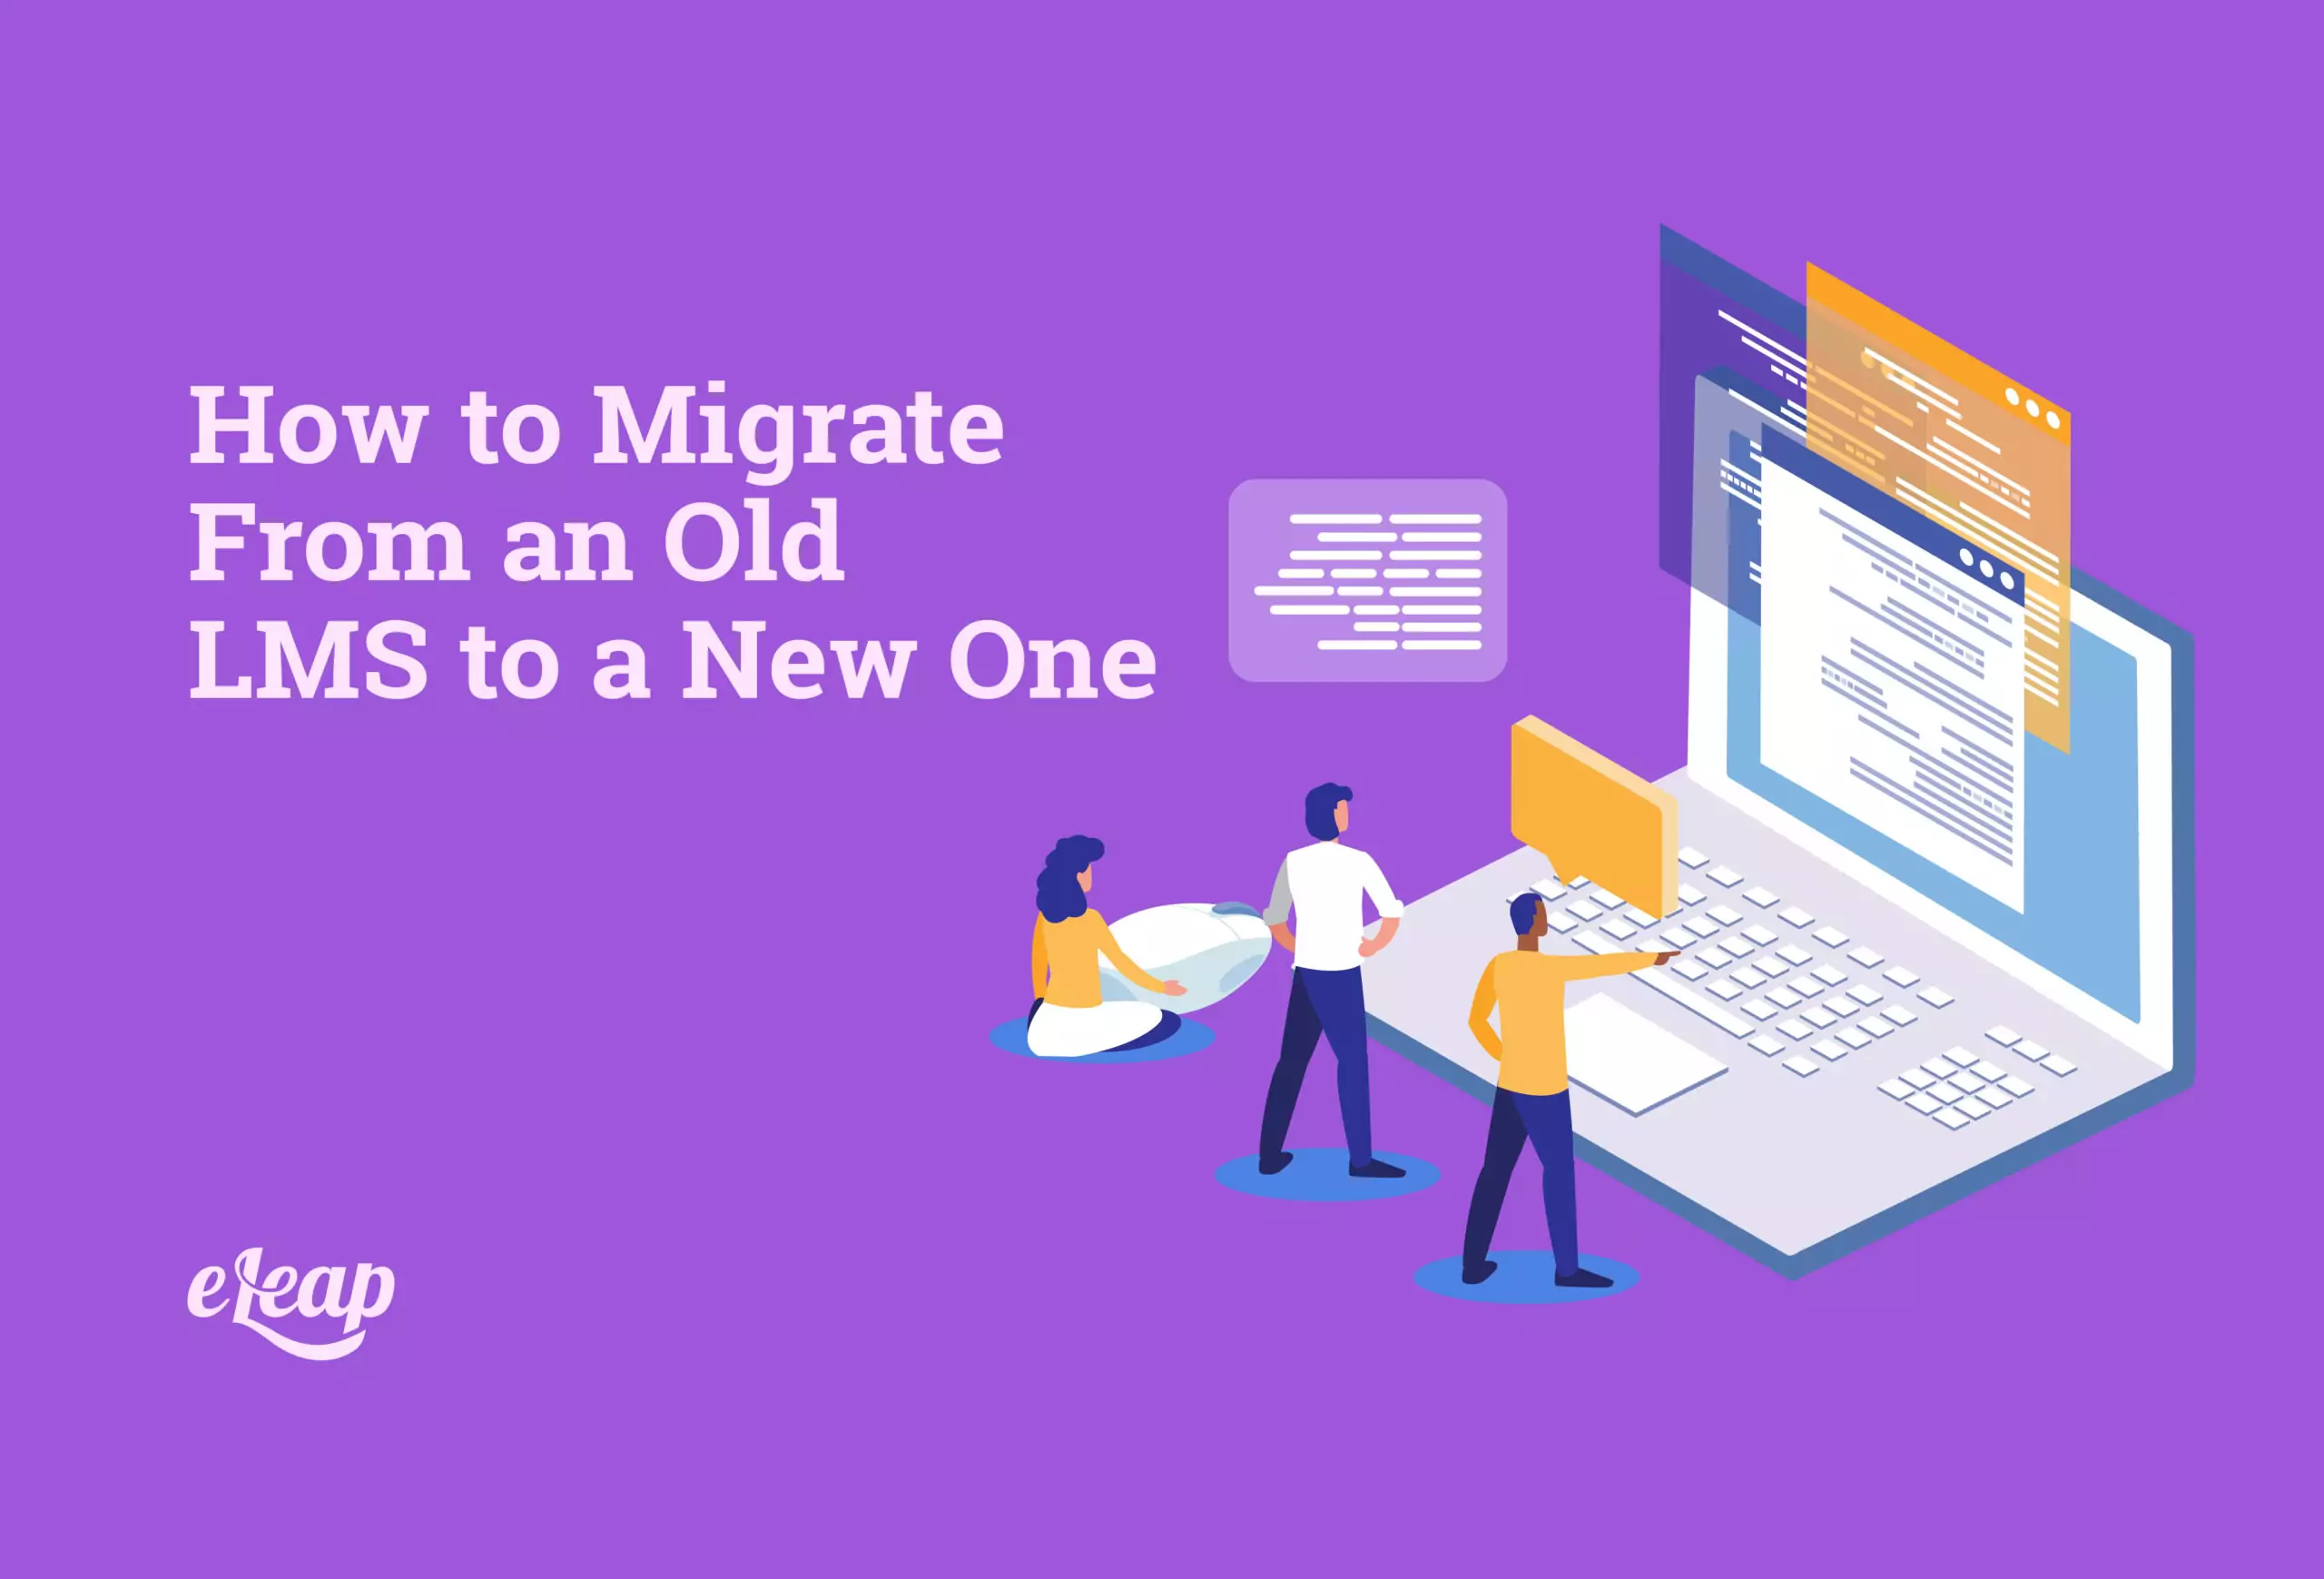 How to Migrate From an Old LMS to a New One